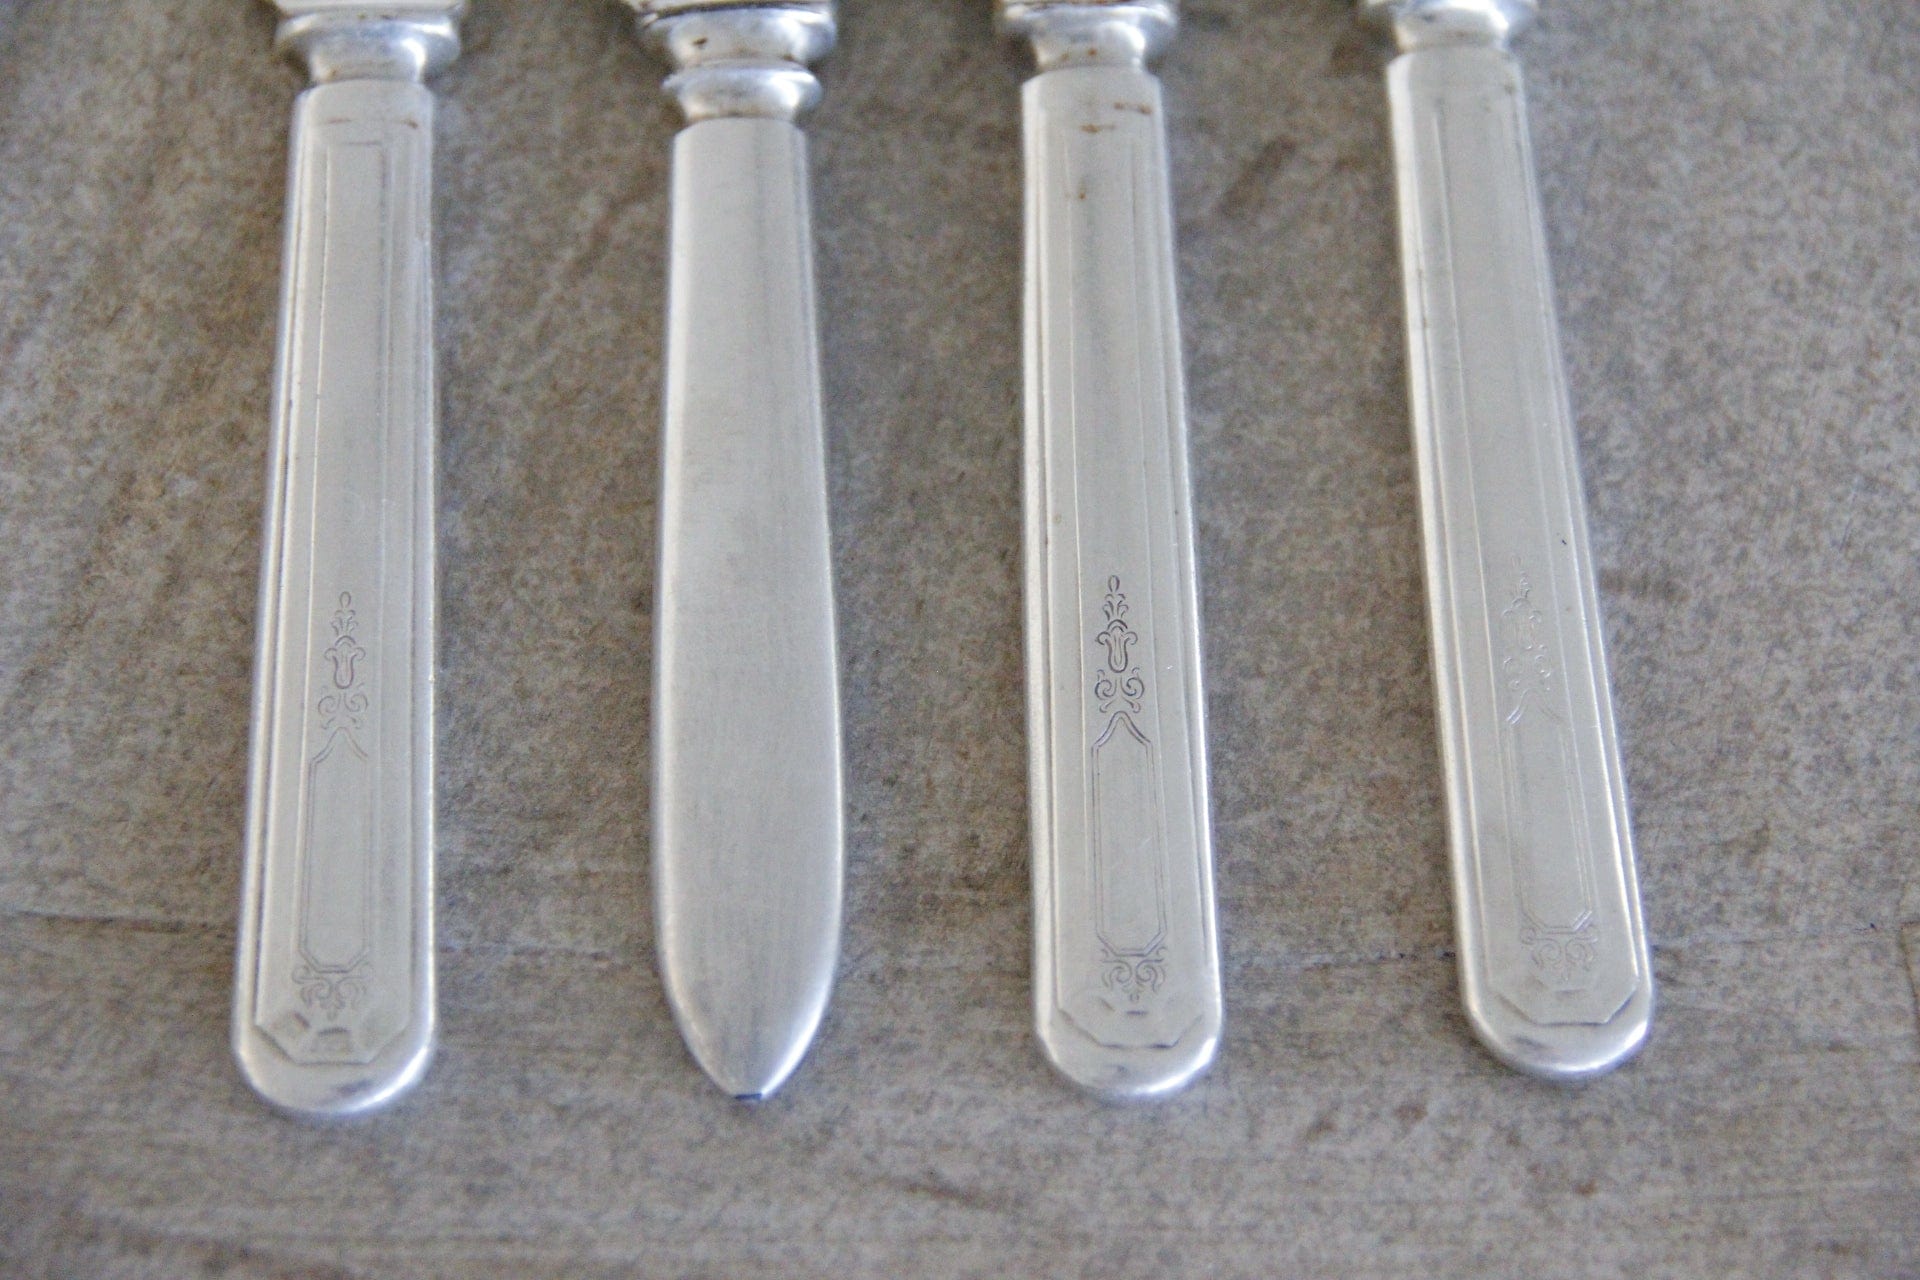 Antique Silver Plated Blunt Table Knife | Flatware 4 Mixed Pcs Tableware